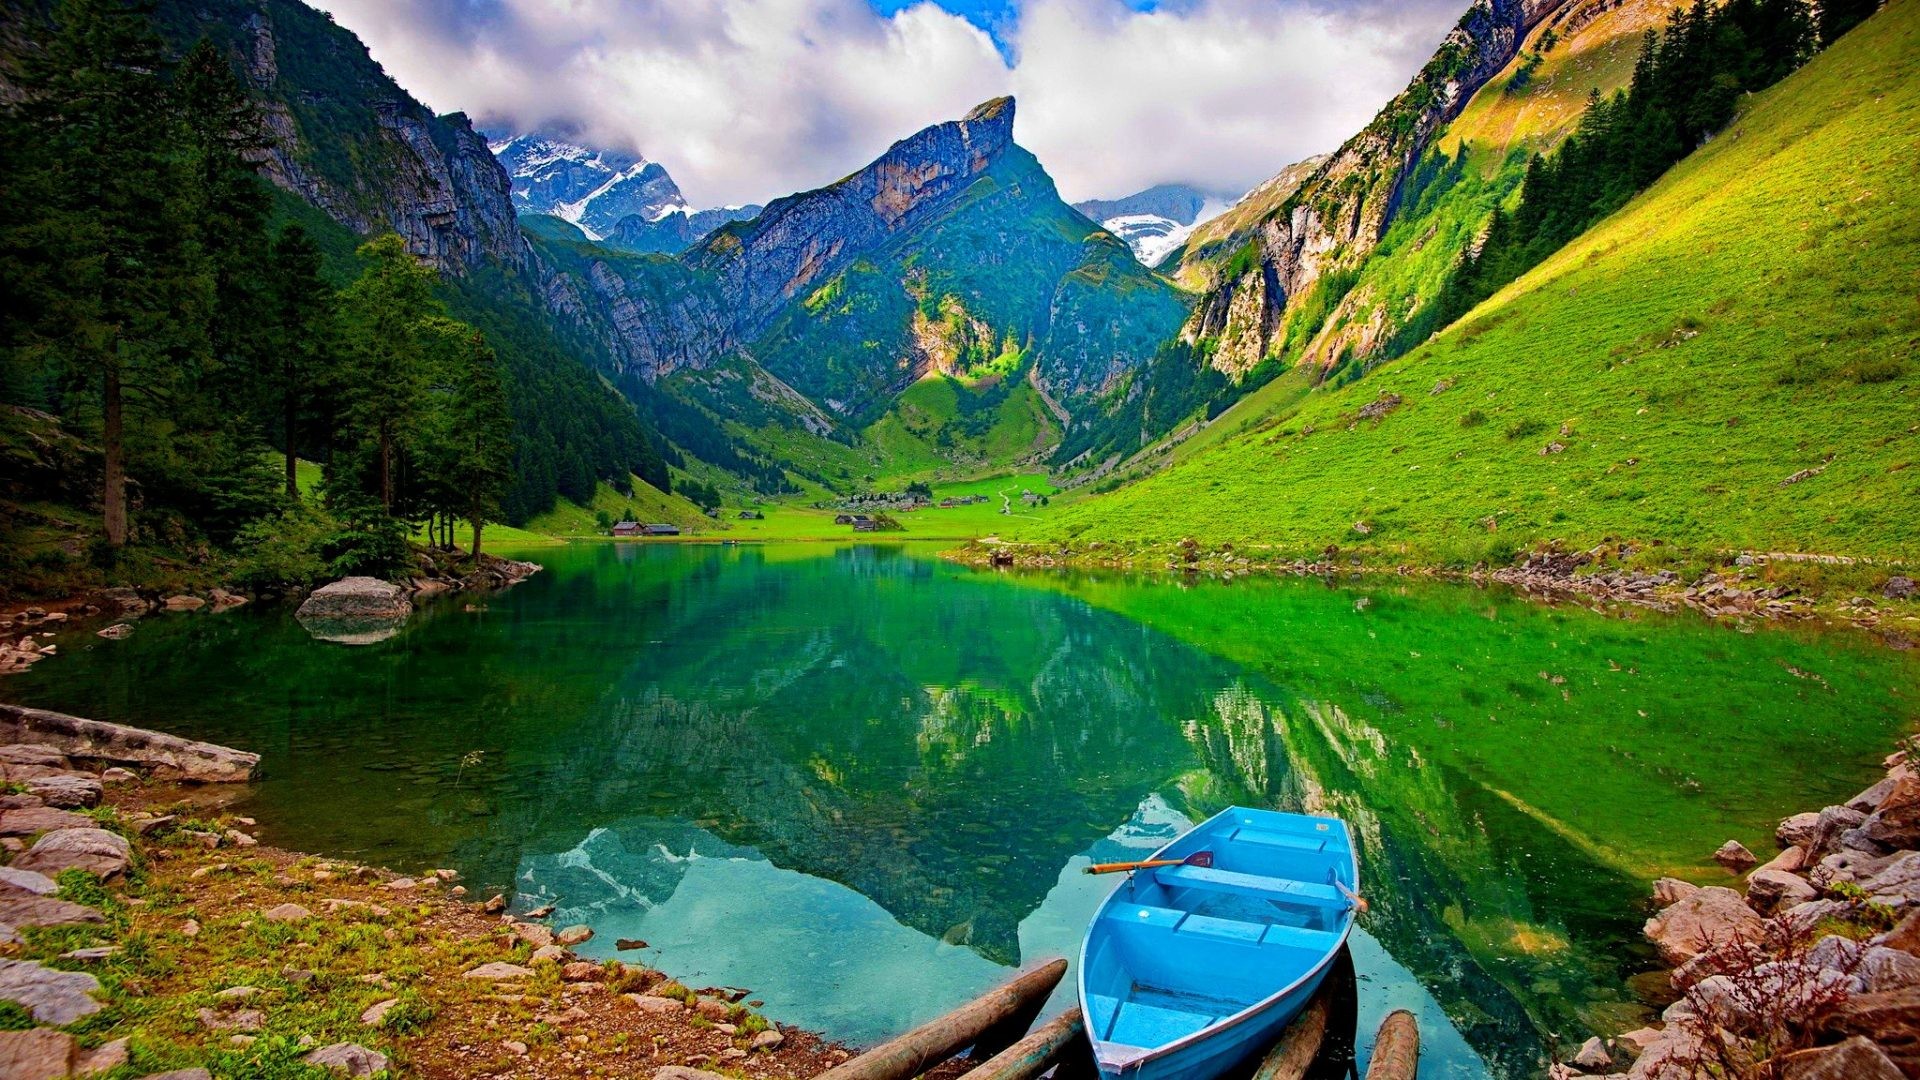 Lakes – Lonely Boat Mountain Lake Hills Emerald Grass Slopes Clear Lakeshore Sky Nice Summer Nature